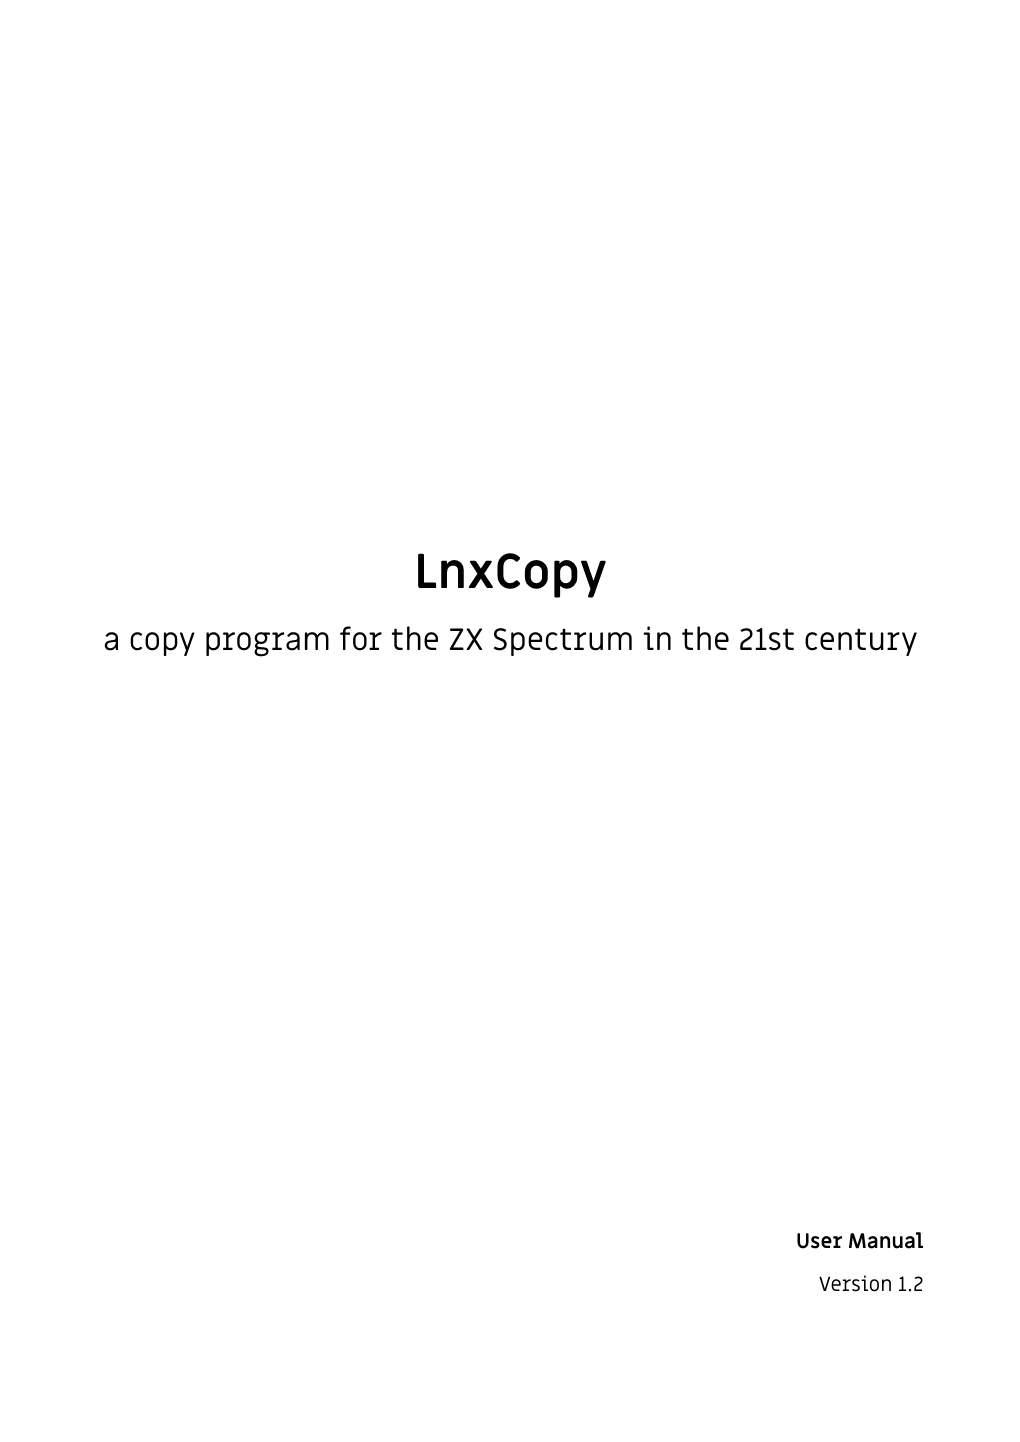 Lnxcopy a Copy Program for the ZX Spectrum in the 21St Century